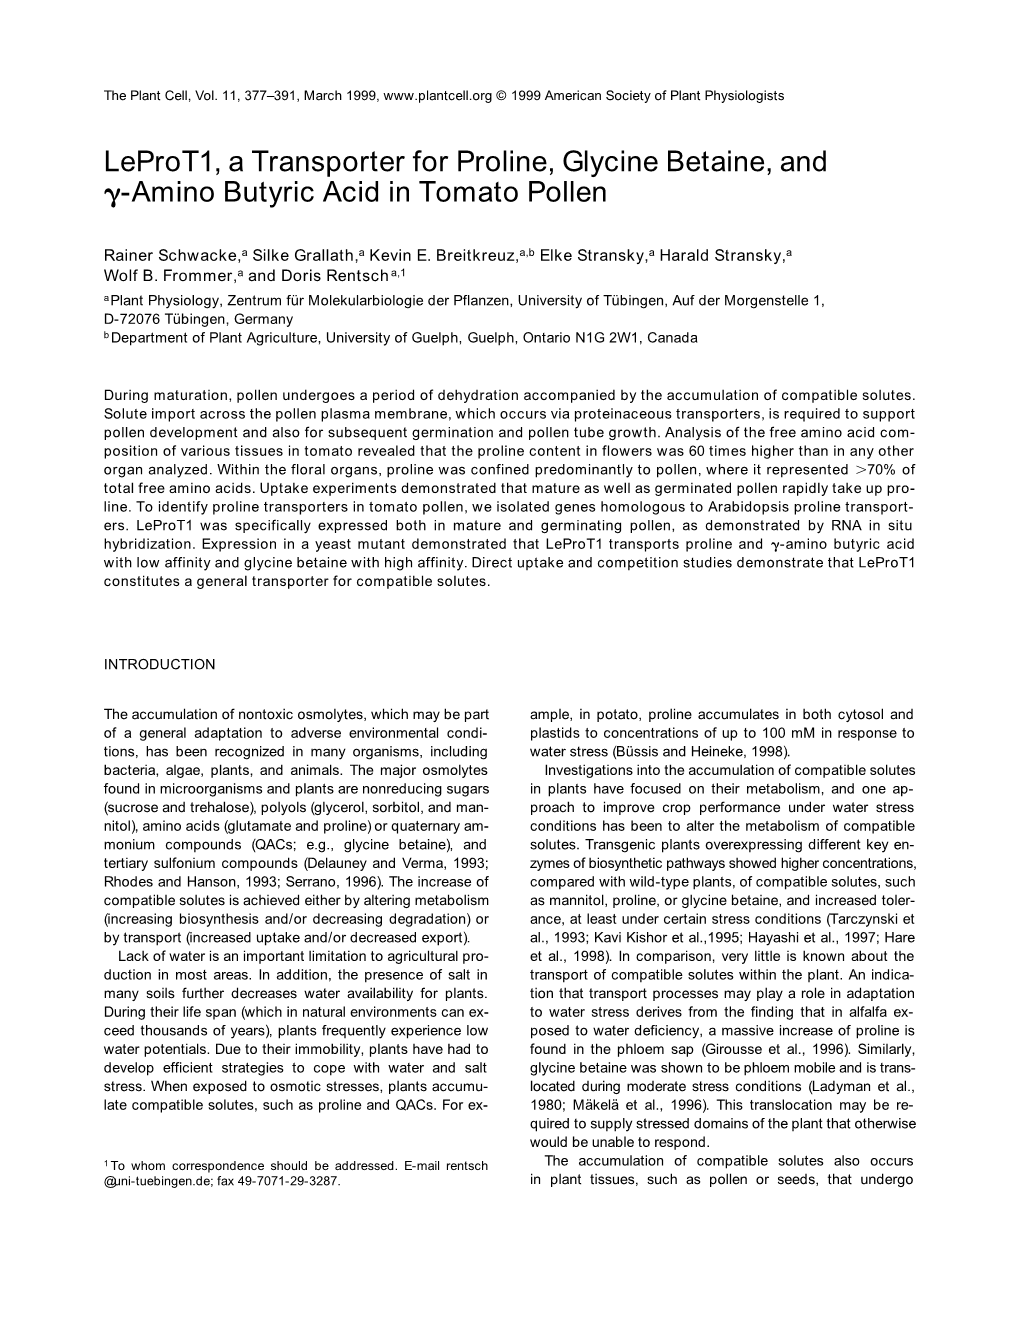 Leprot1, a Transporter for Proline, Glycine Betaine, and -Amino Butyric